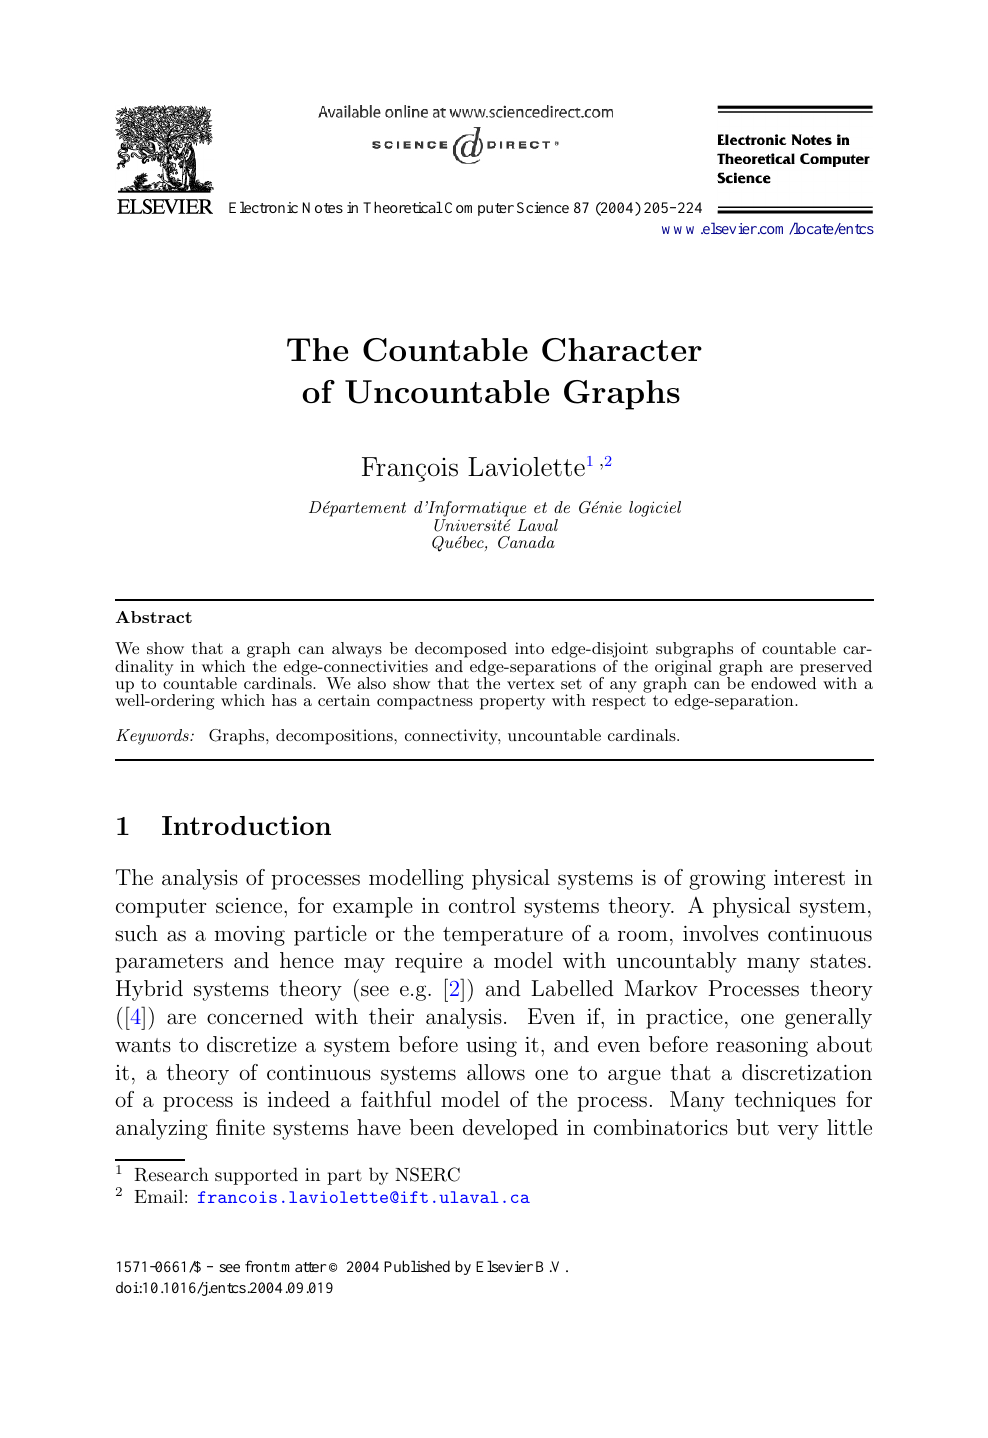 The Countable Character Of Uncountable Graphs Topic Of Research Paper In Computer And Information Sciences Download Scholarly Article Pdf And Read For Free On Cyberleninka Open Science Hub